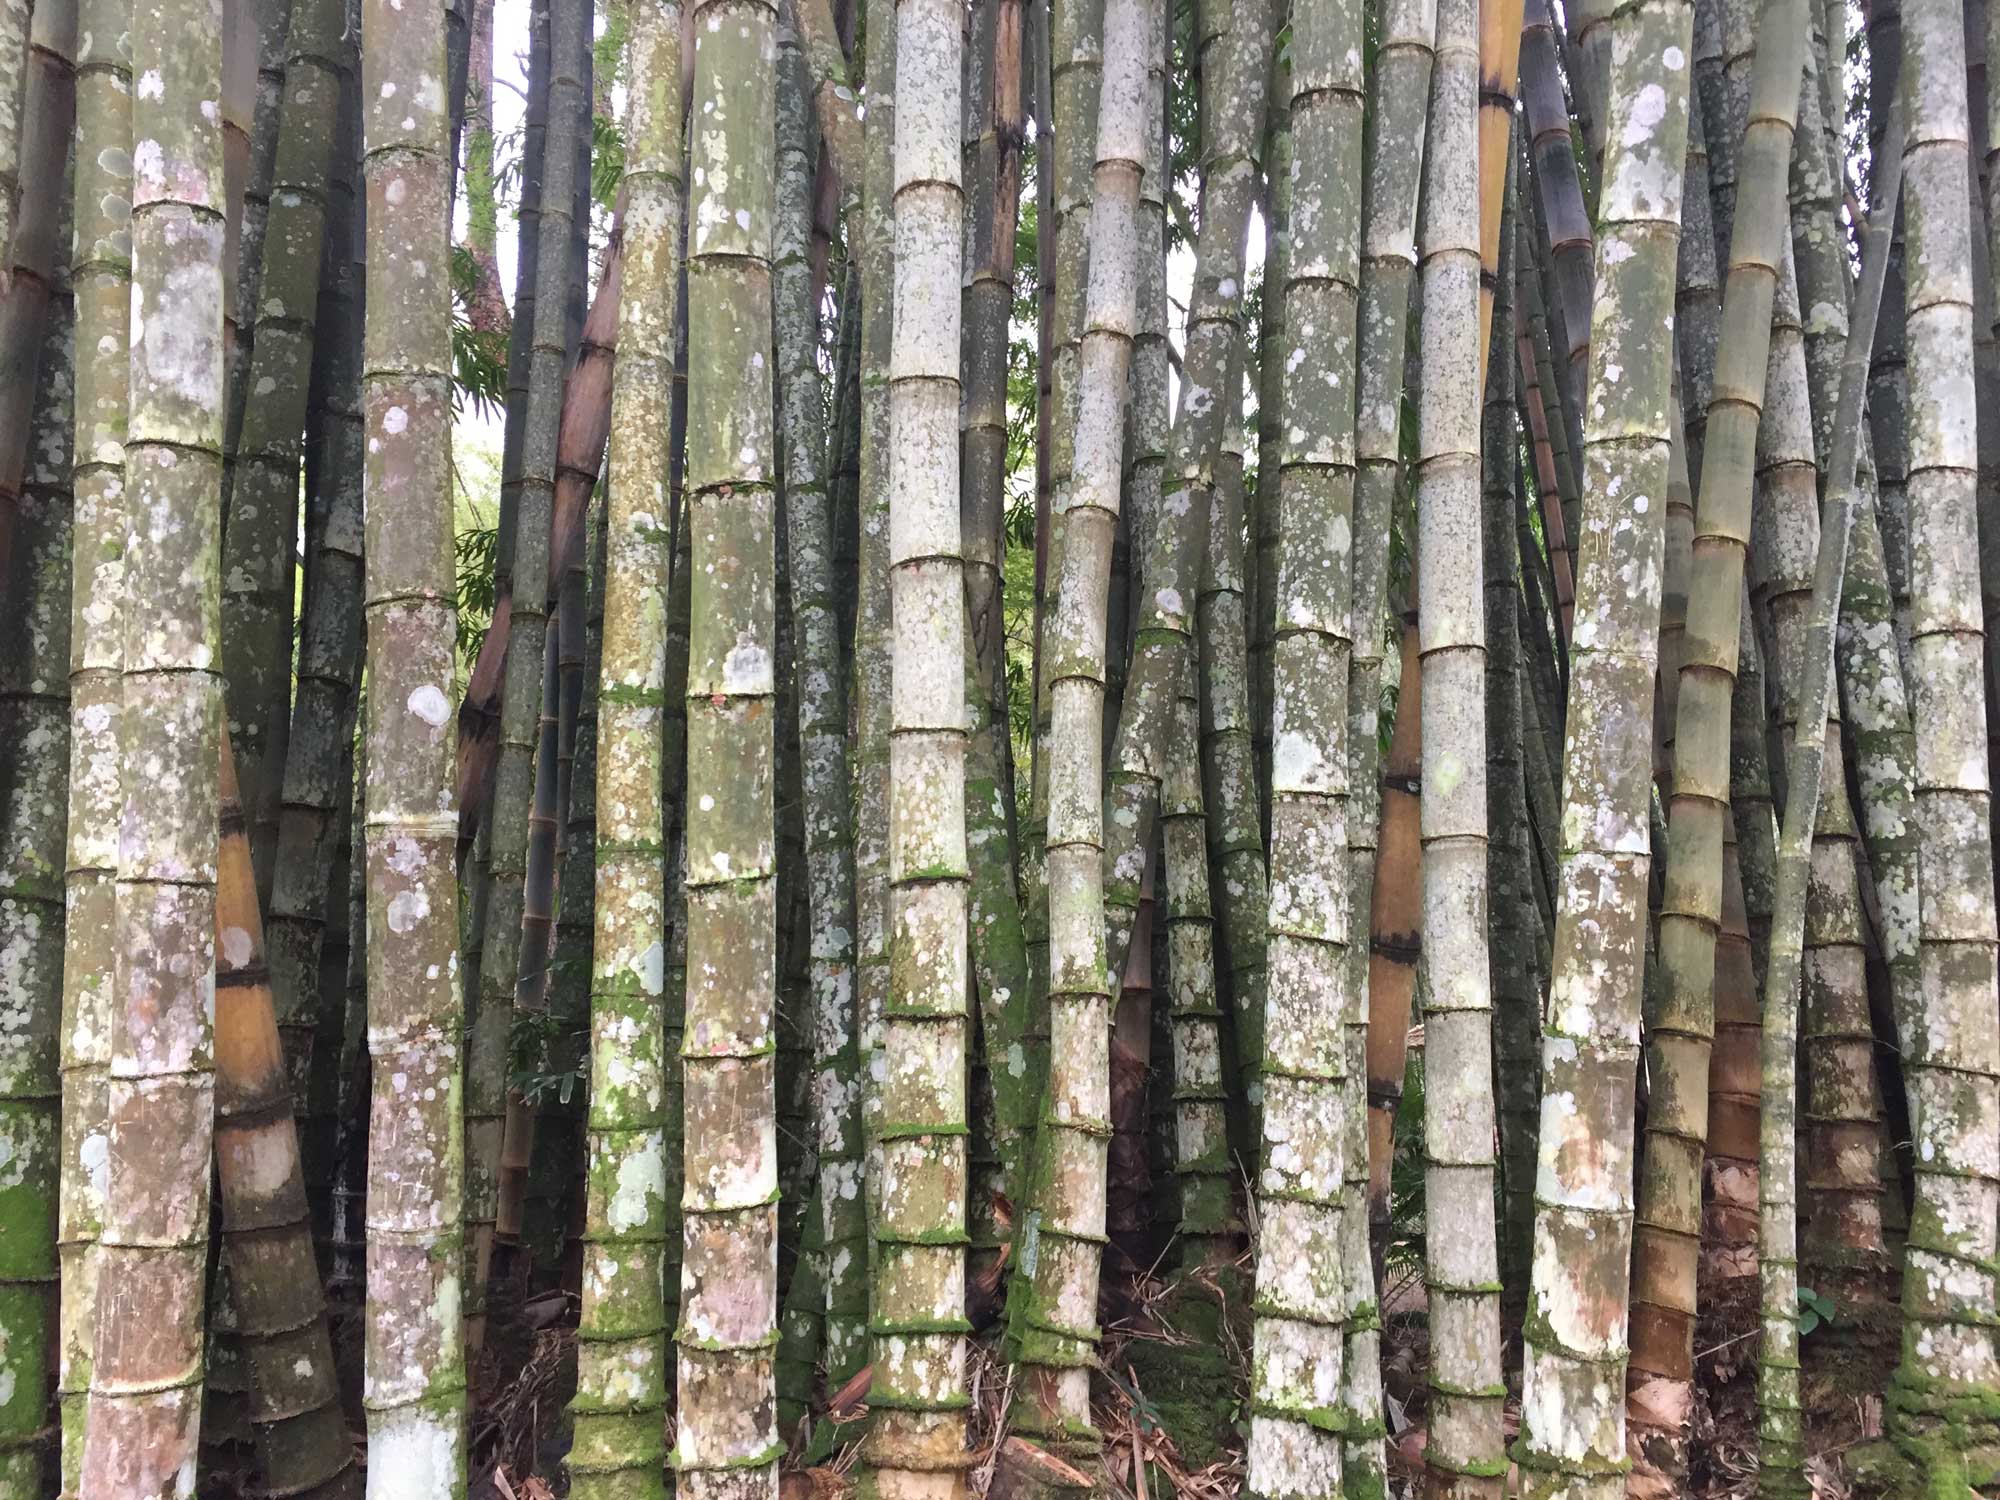 Photograph of bamboo stems. The node on the stem are easy to see because they look like series of shallow furrows encircling each stem at more or less regular intervals.